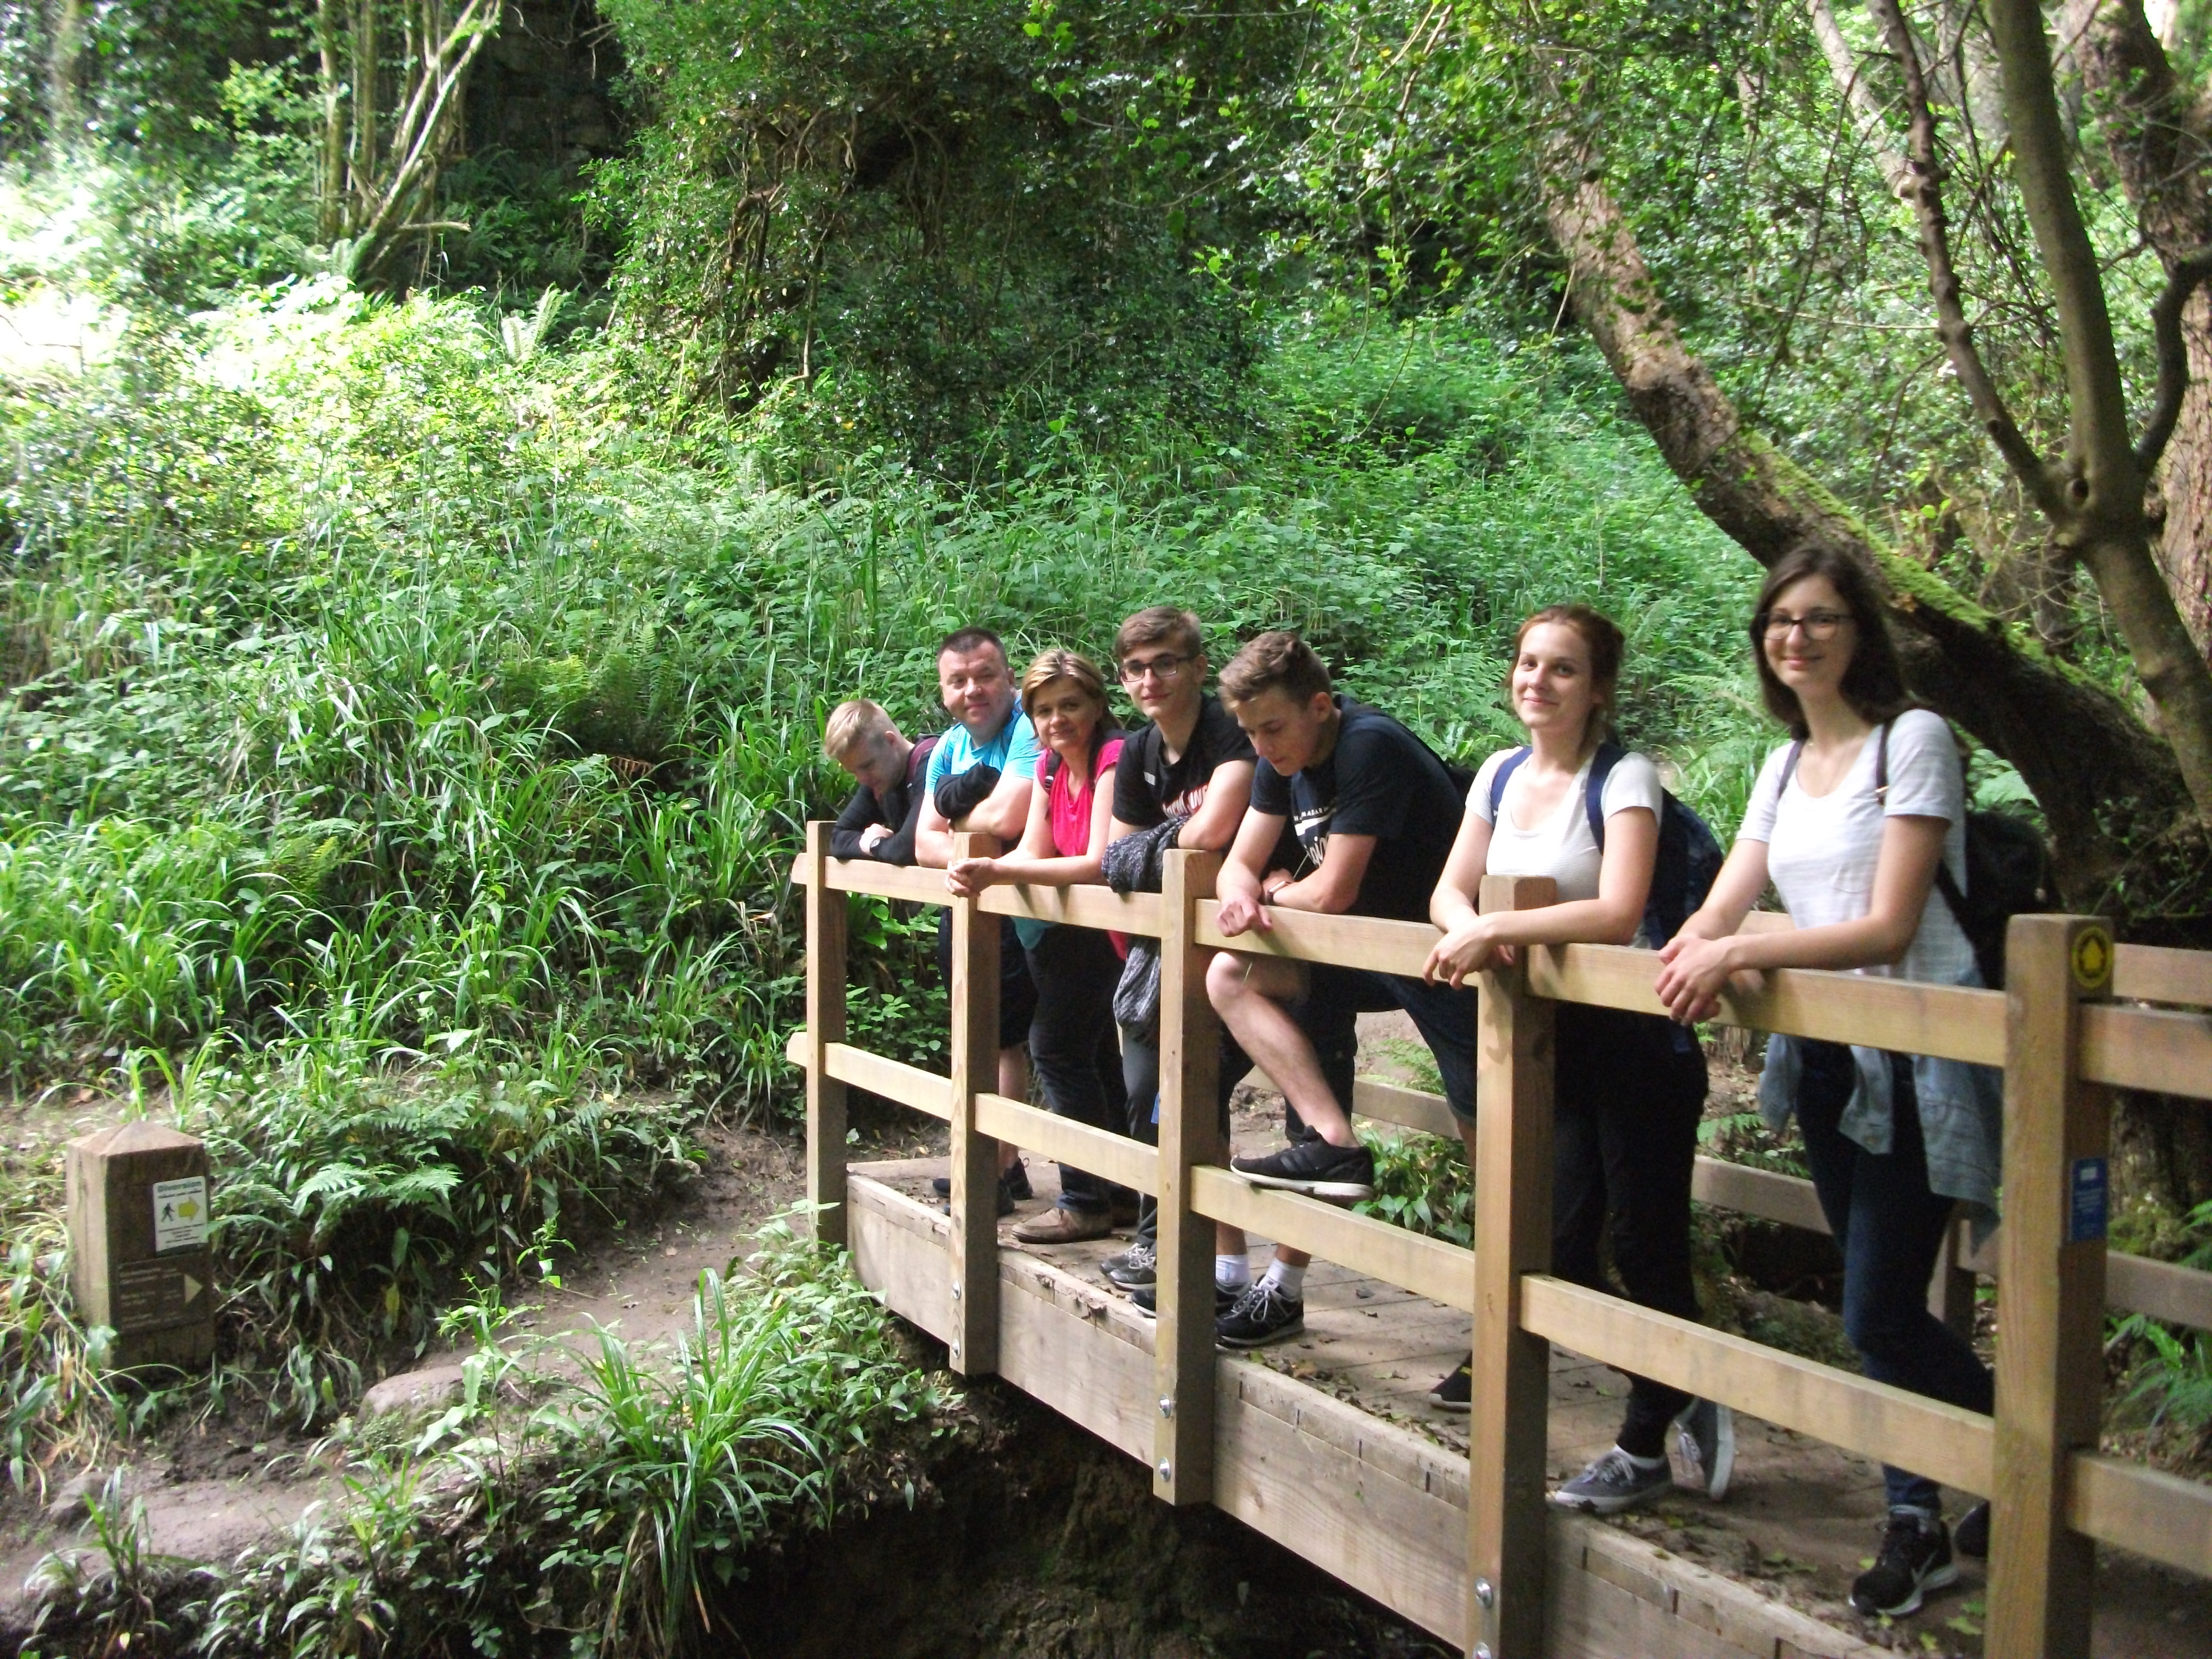 English language students study English in England relax during a countryside walk